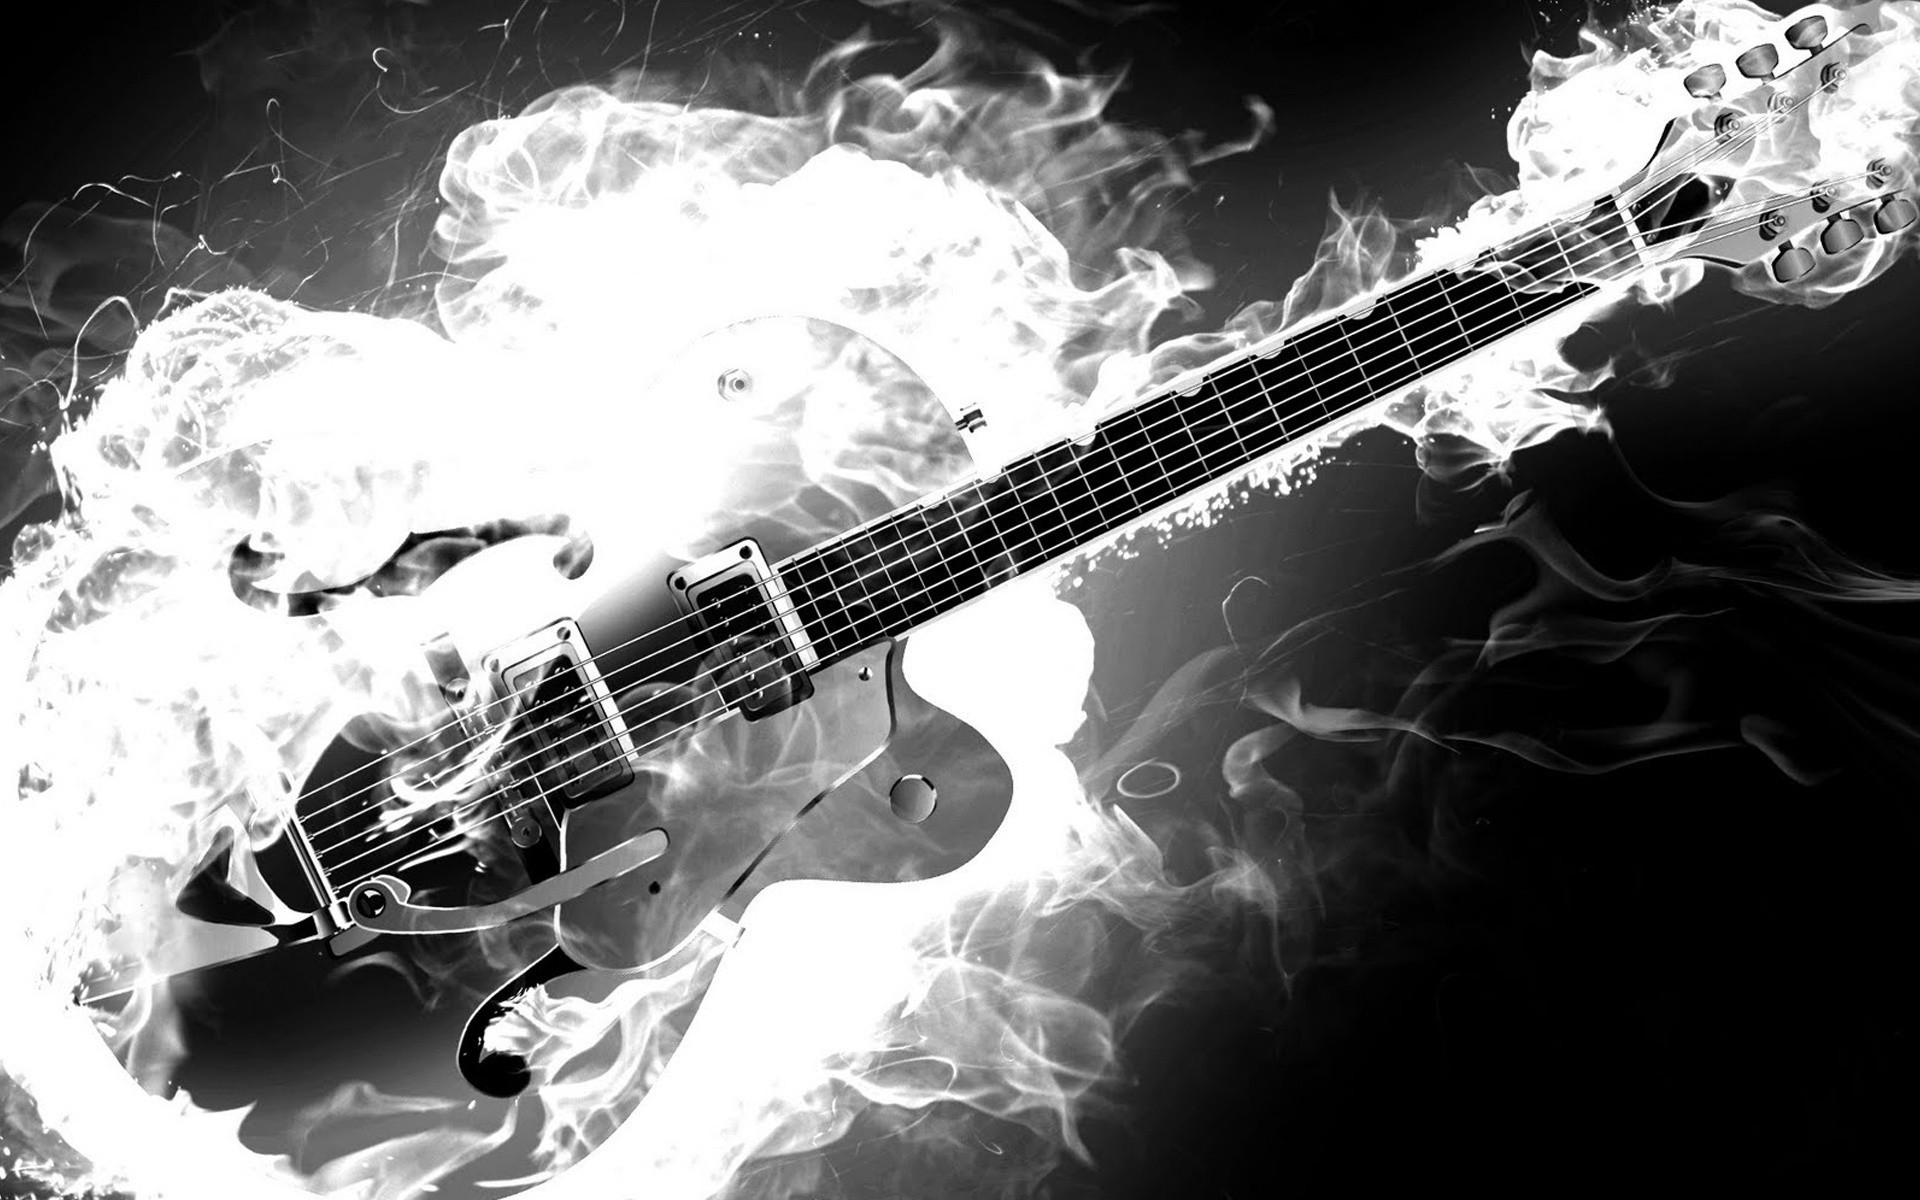 1920x1200  Cool Guitar Backgrounds | HD Wallpapers | Pinterest | Hd wallpaper,  Guitars and Wallpaper